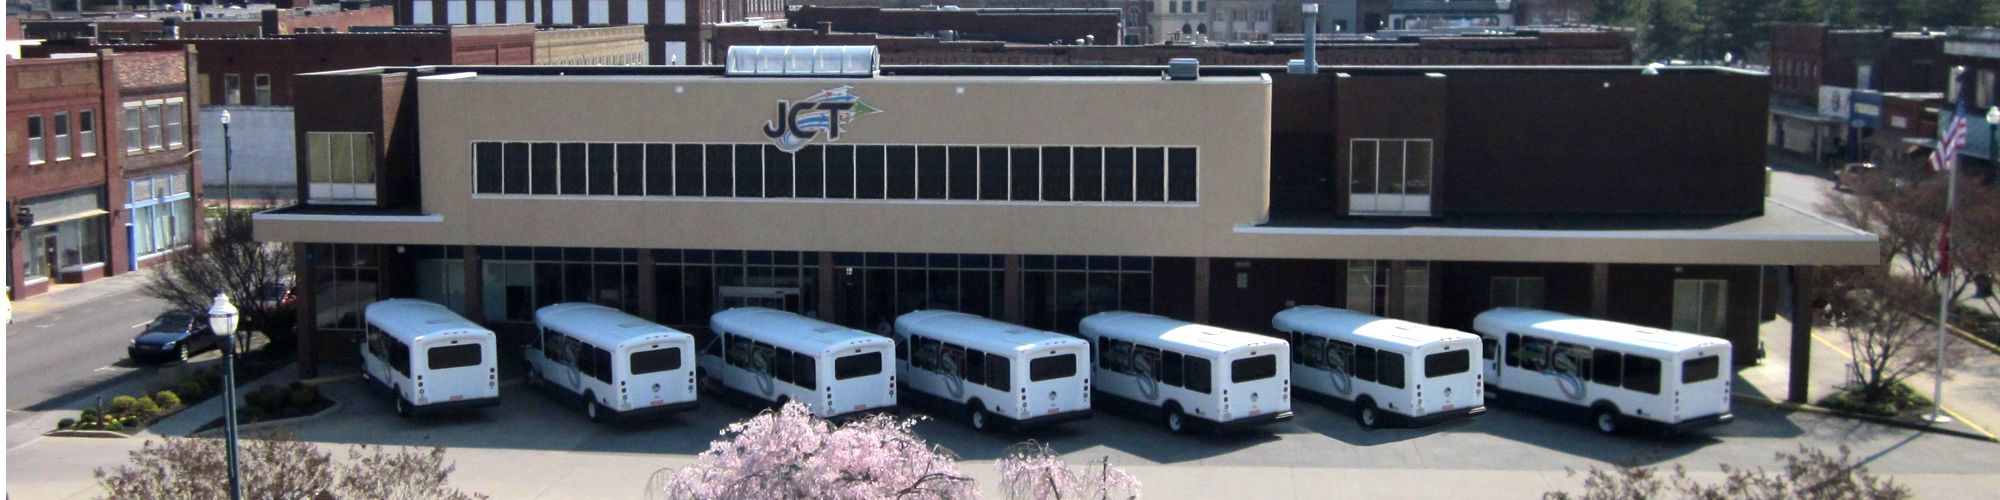 Aerial view of Johnson City Transit Center with buses in front